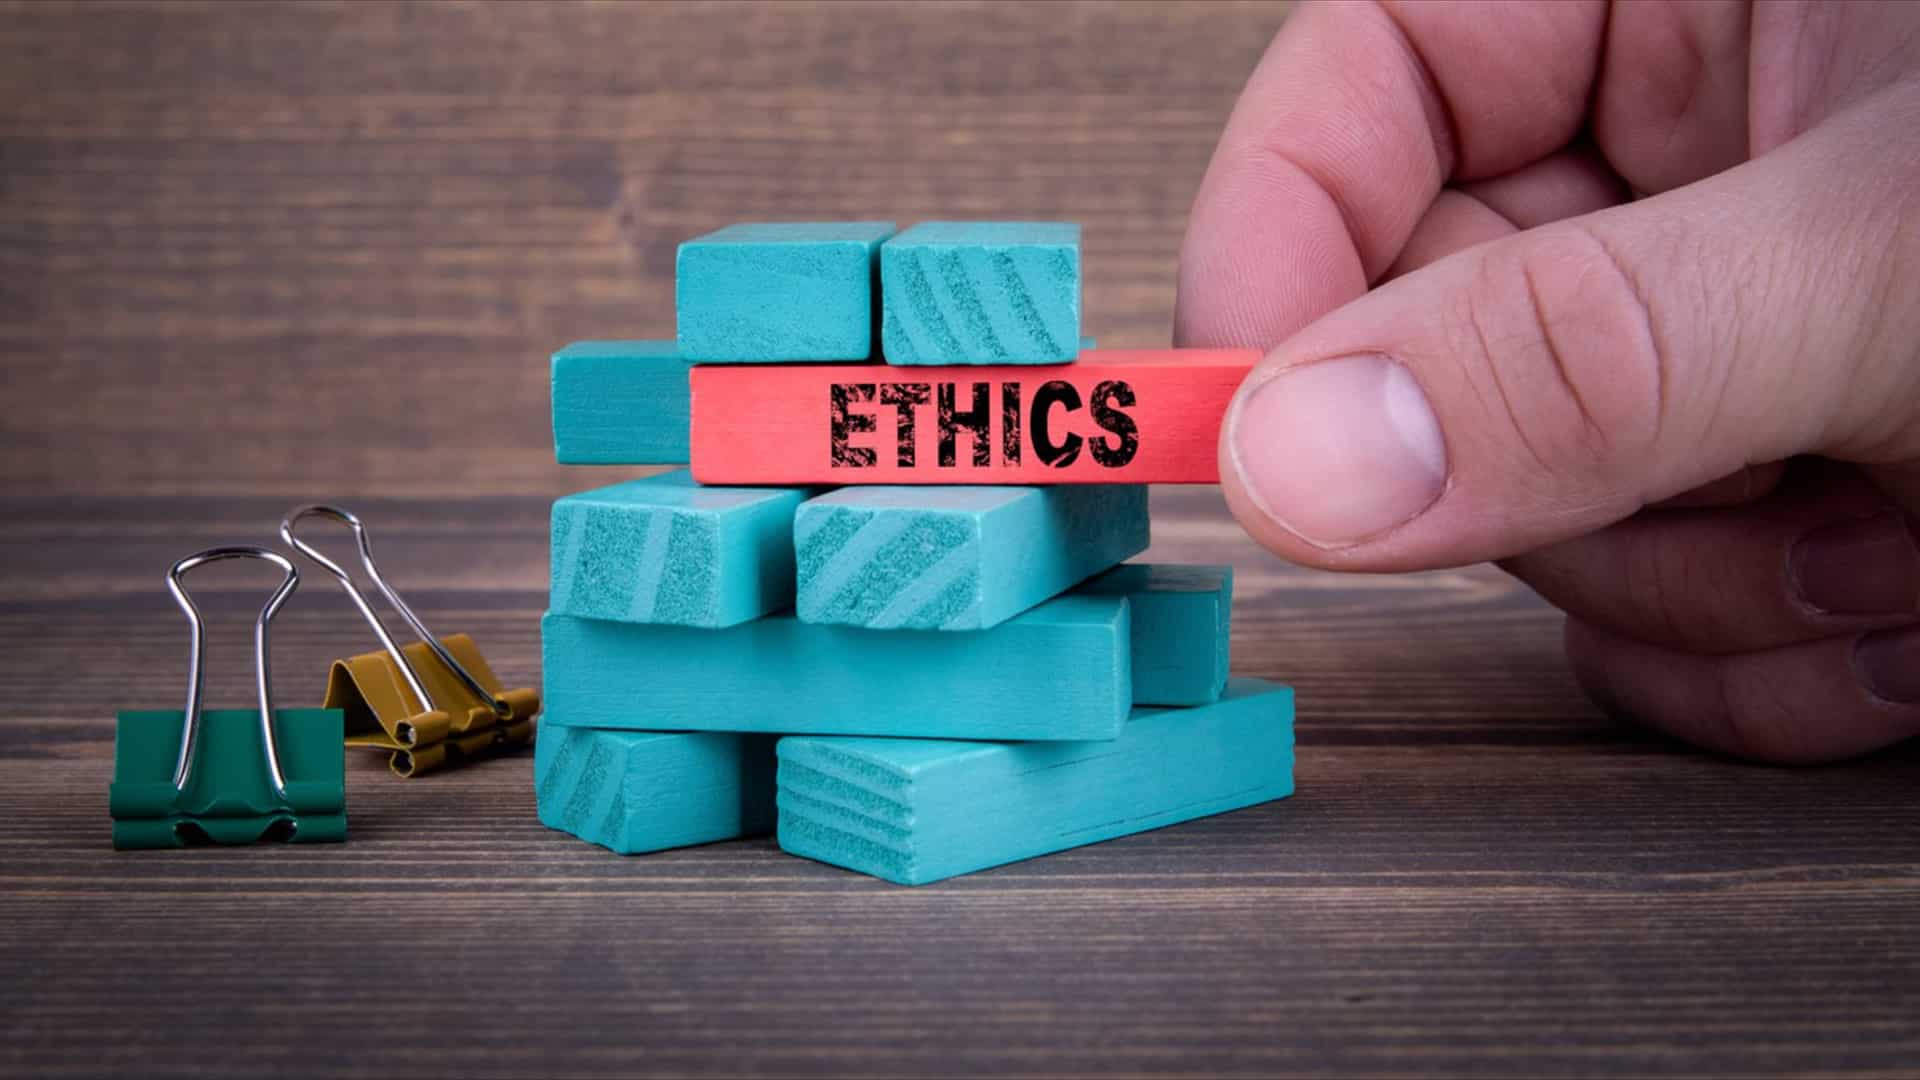 Mike Church Show-Parents Want Their Kids To Be Ethical But Think The Ethics Fairy Teaches It!